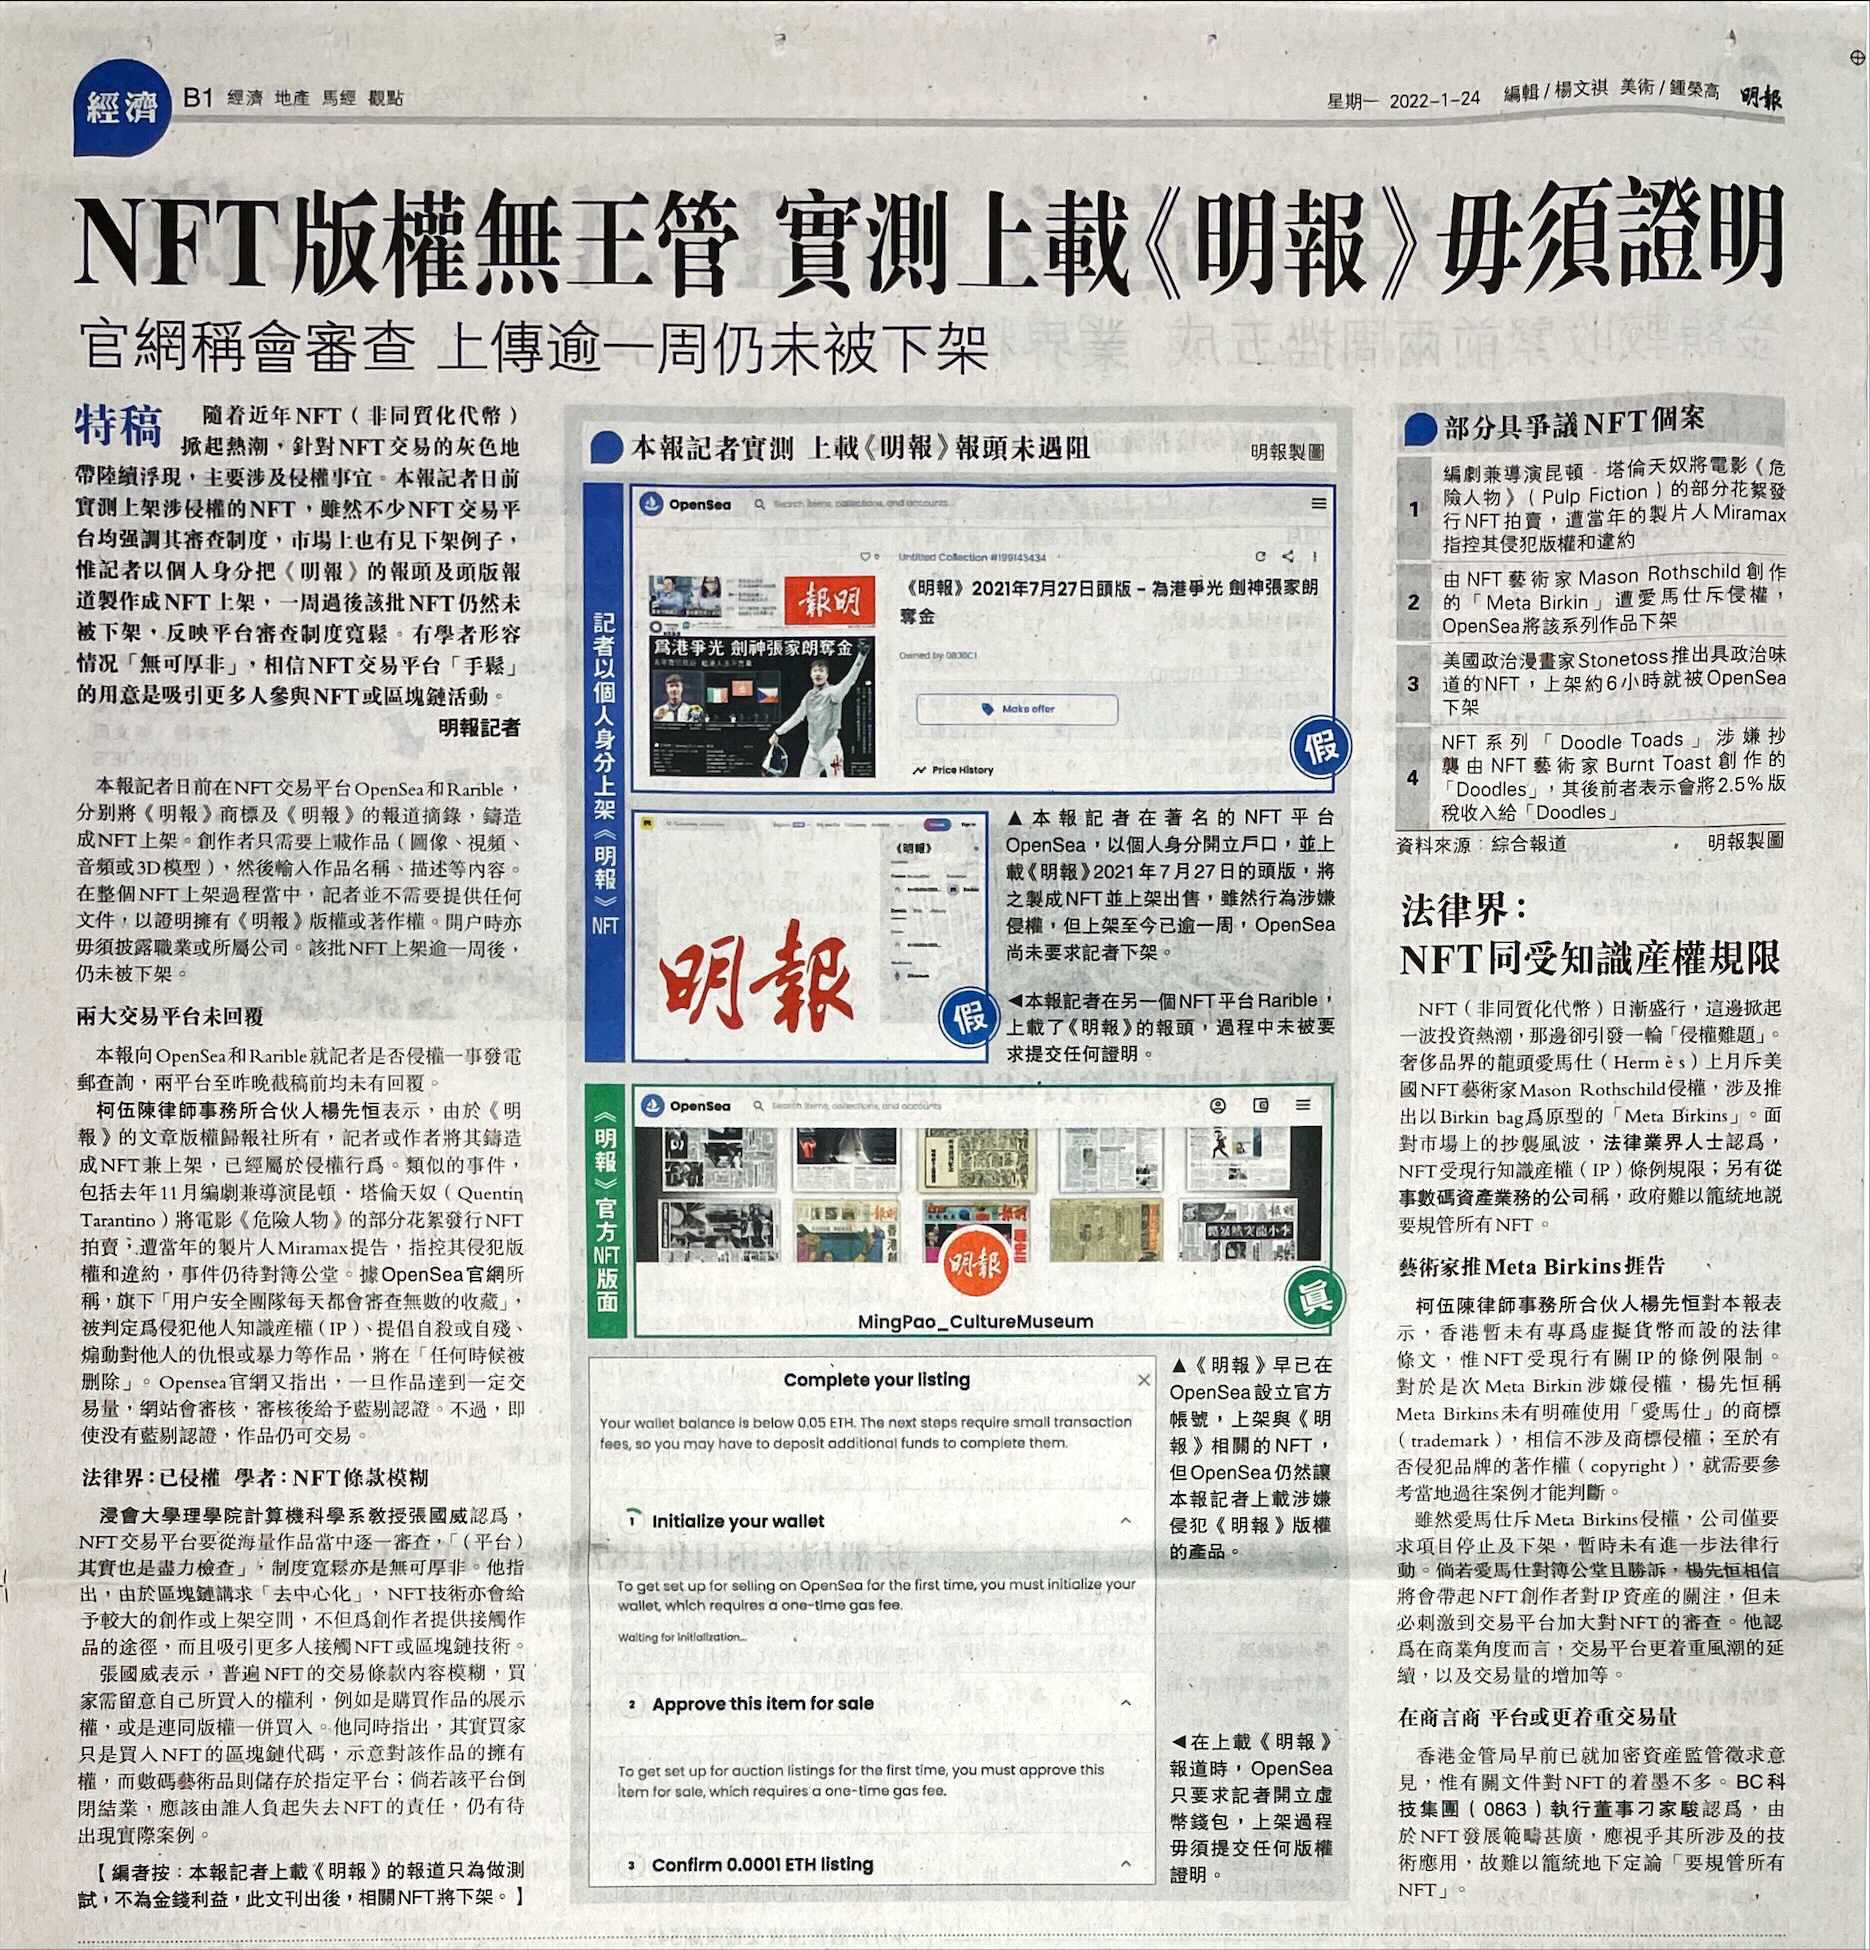 Dr Lawrence Yeung was interviewed by Mingpao on copyright issues of NFT